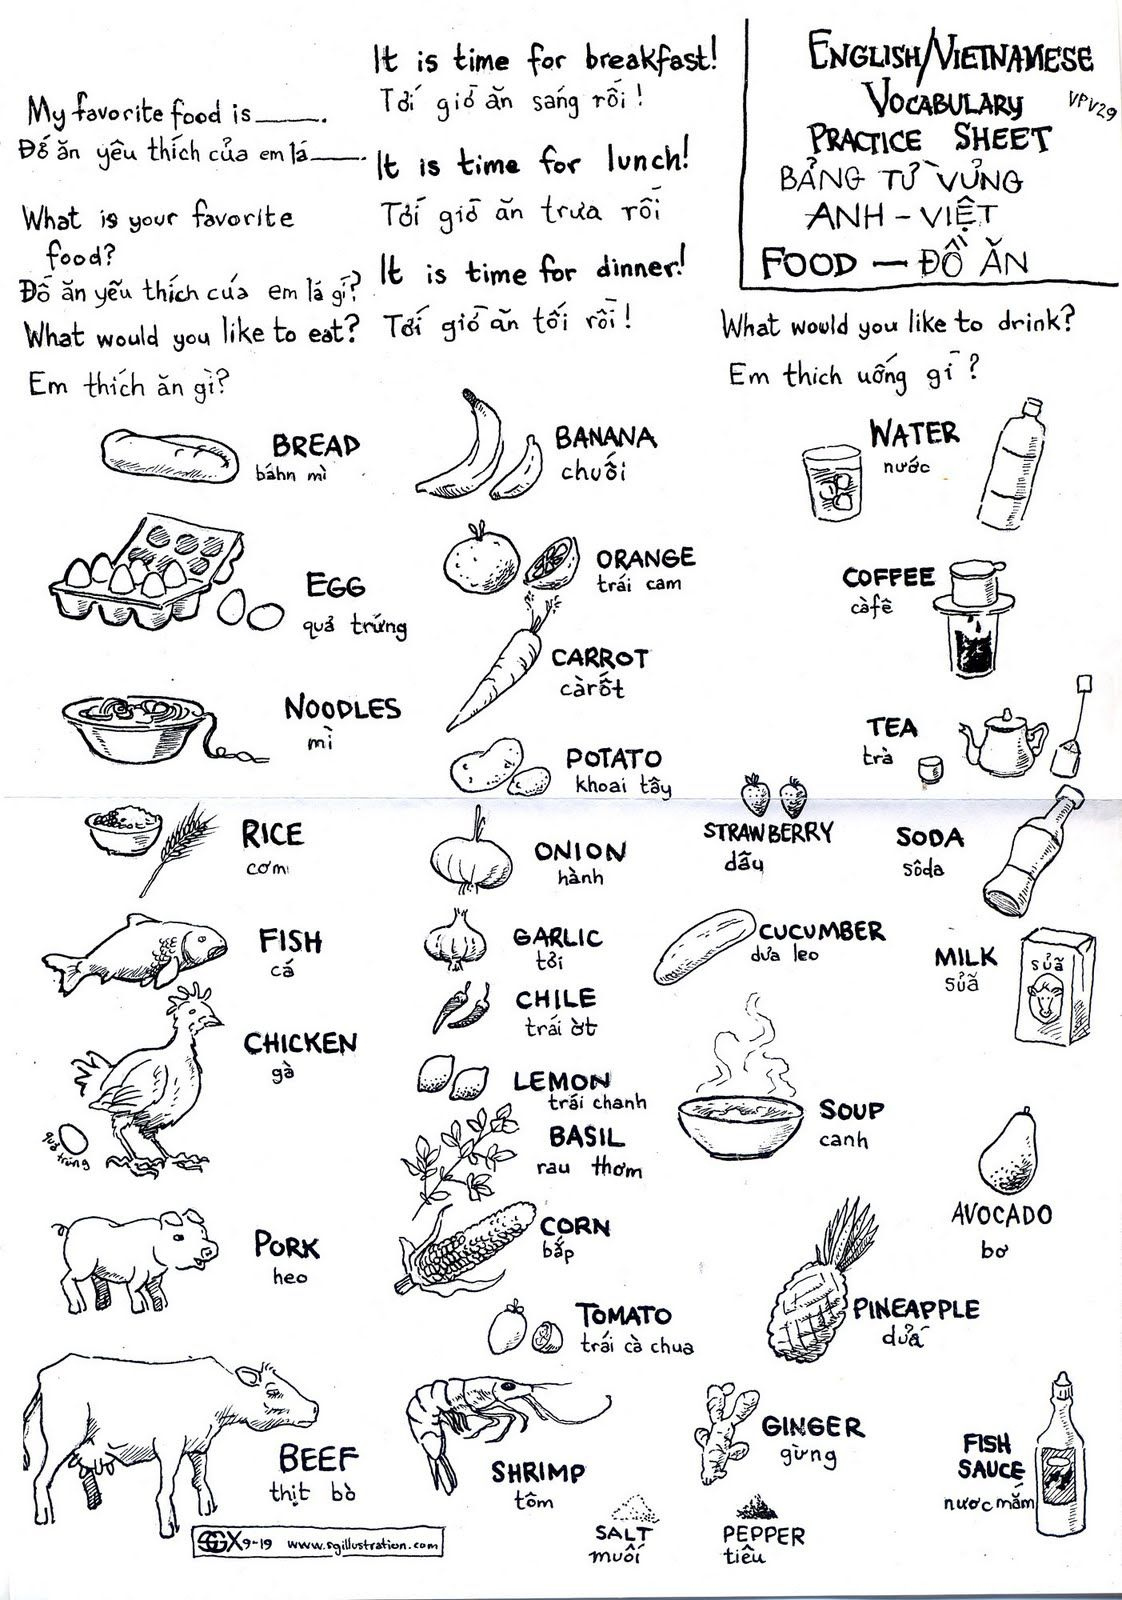 Vietnamese food page Vietnamese Language Colouring Pages Practice Sheet